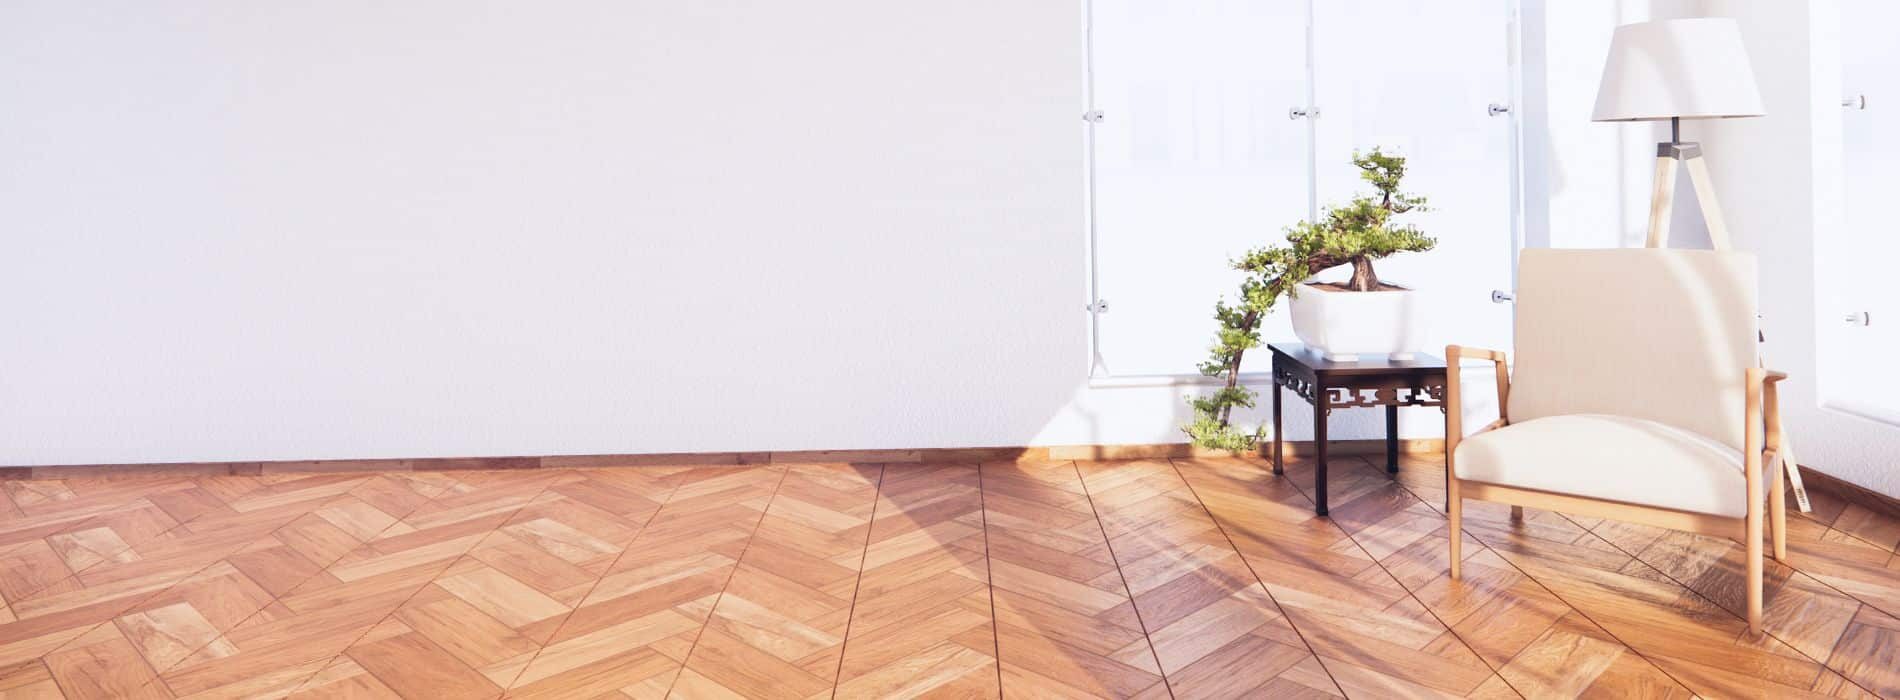 Experience the beauty of a professionally restored hardwood floor in Whitechapel, E1. Our experts at Mr Sander® skillfully restored a 5-year-old floor using Bona 2.5K Frost whitewashing and Traffic HD 15% sheen matte lacquer. This durable and stunning finish ensures long-lasting beauty for years to come.